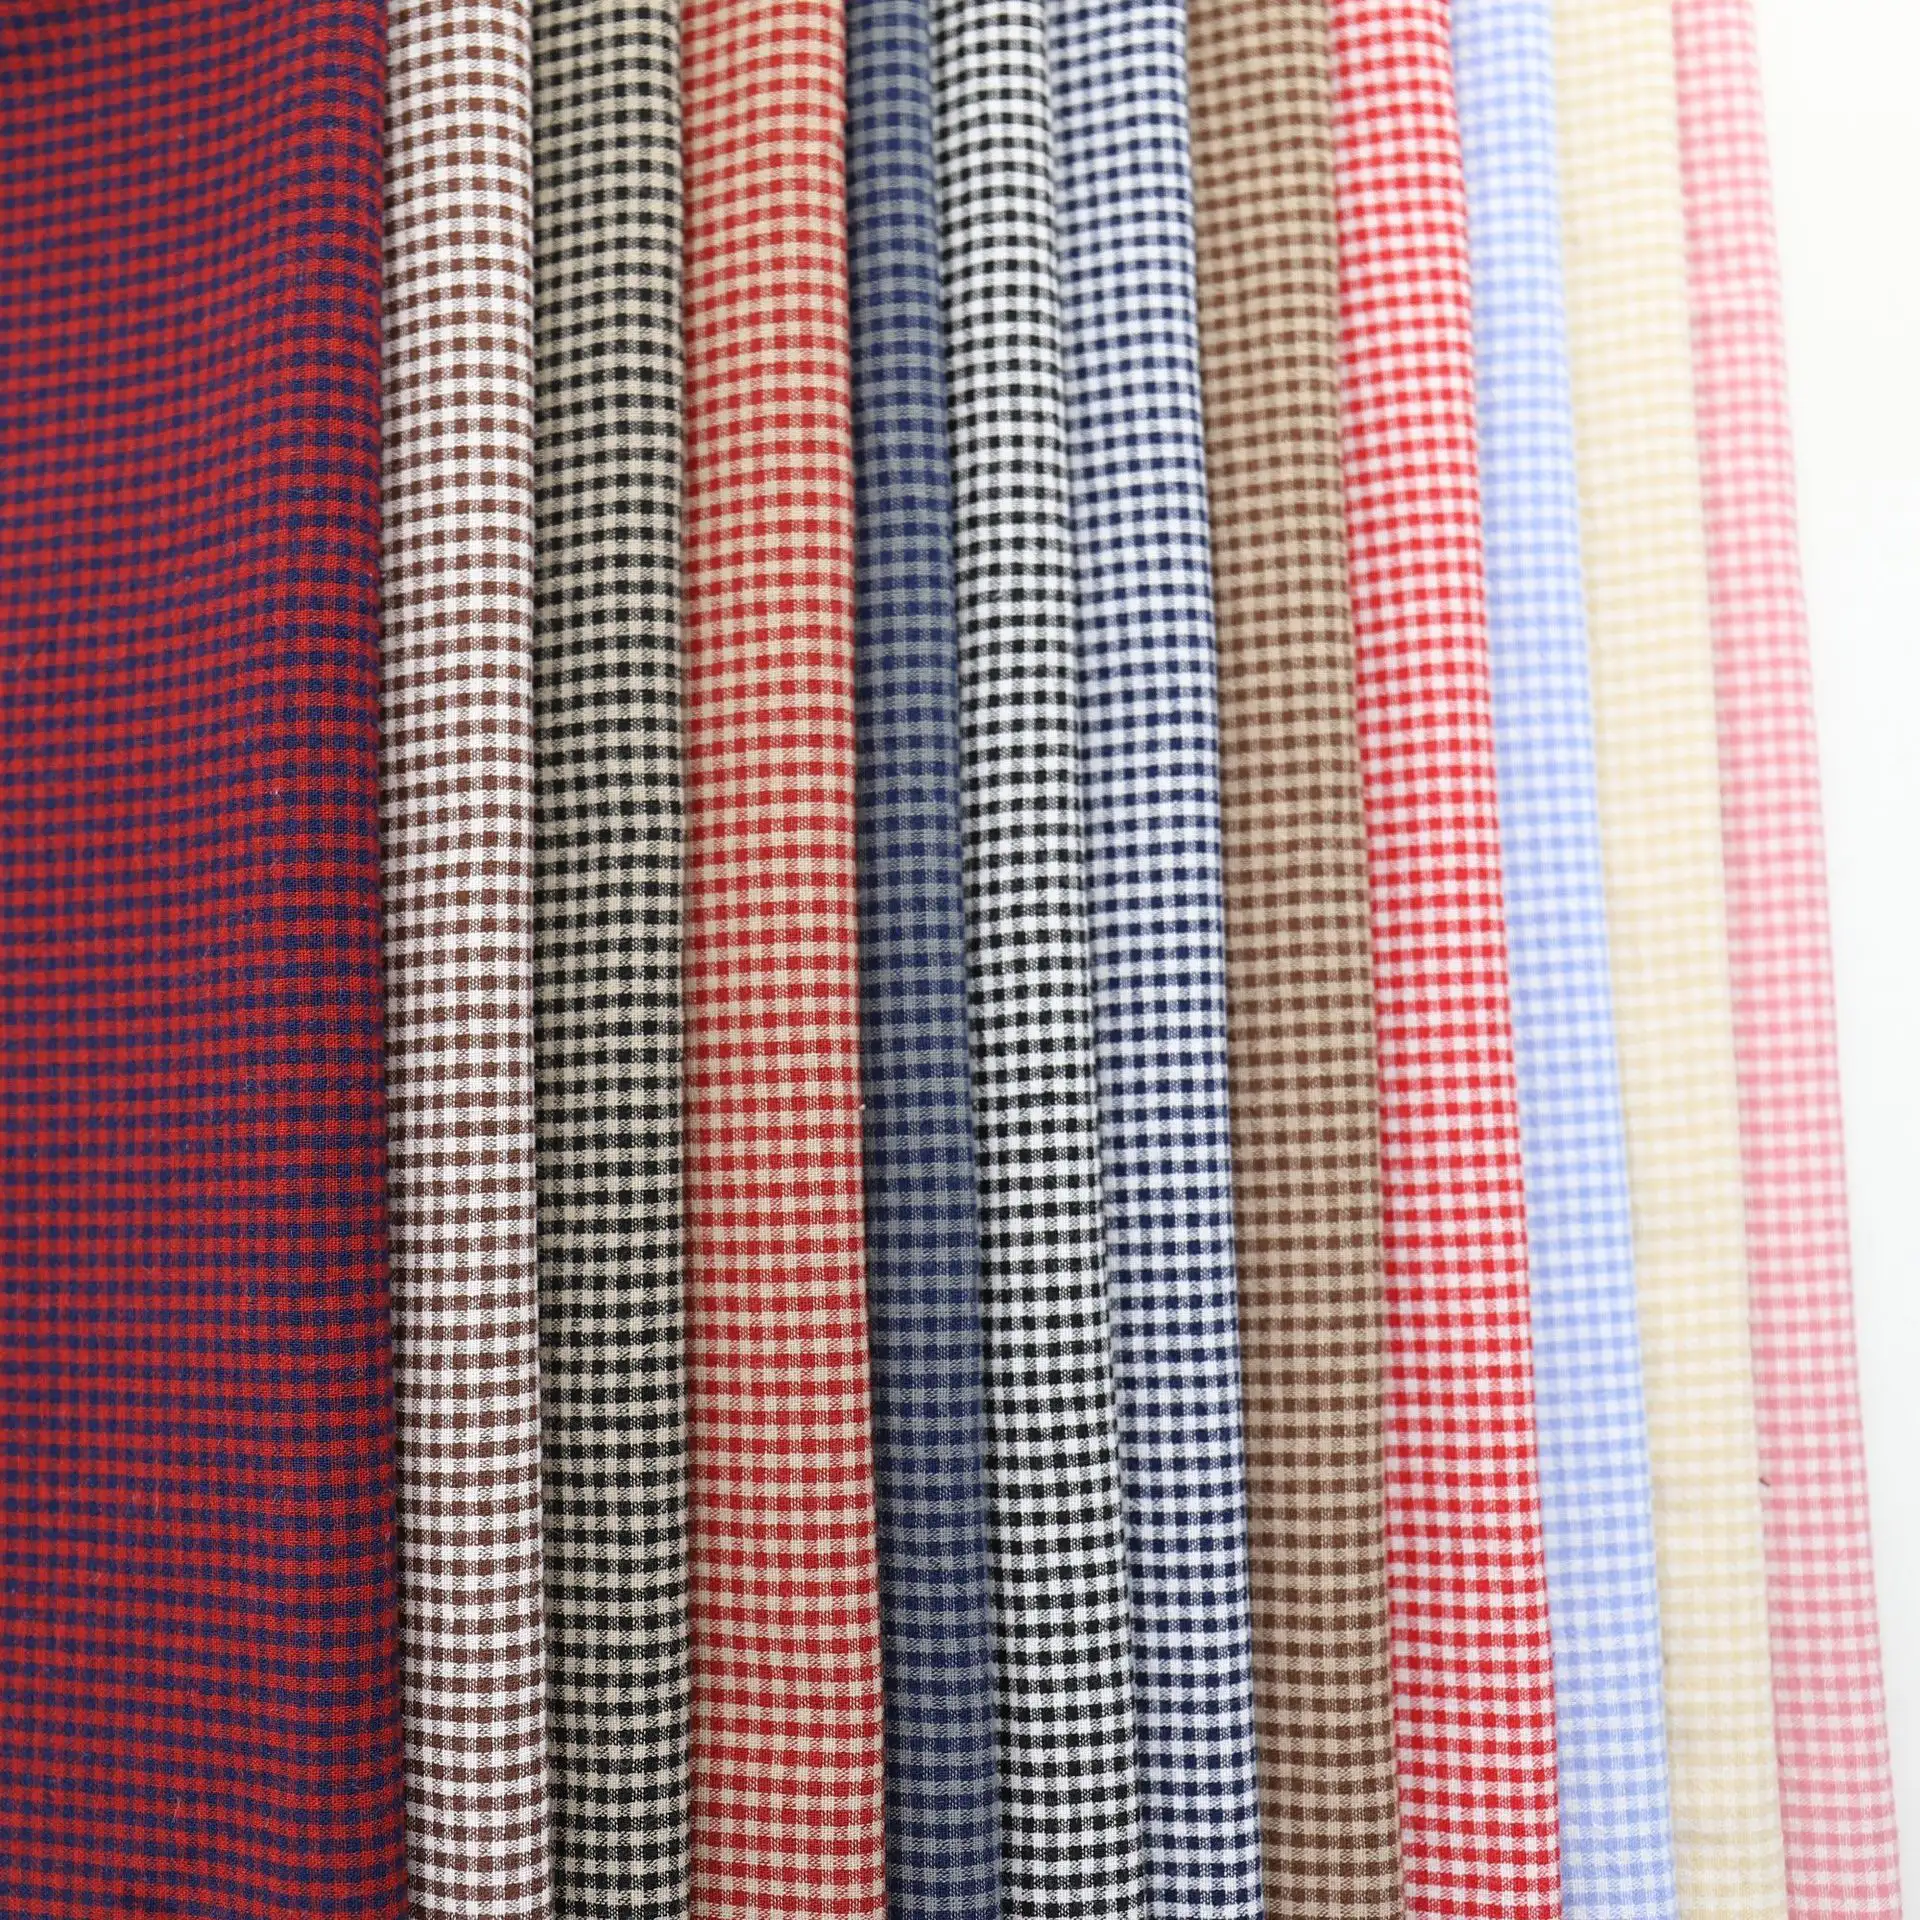 2022 New Fashion Stock Yarn Dyed Washed Small Plaid 100 Cotton Fabric Garment Fabric For Cloth